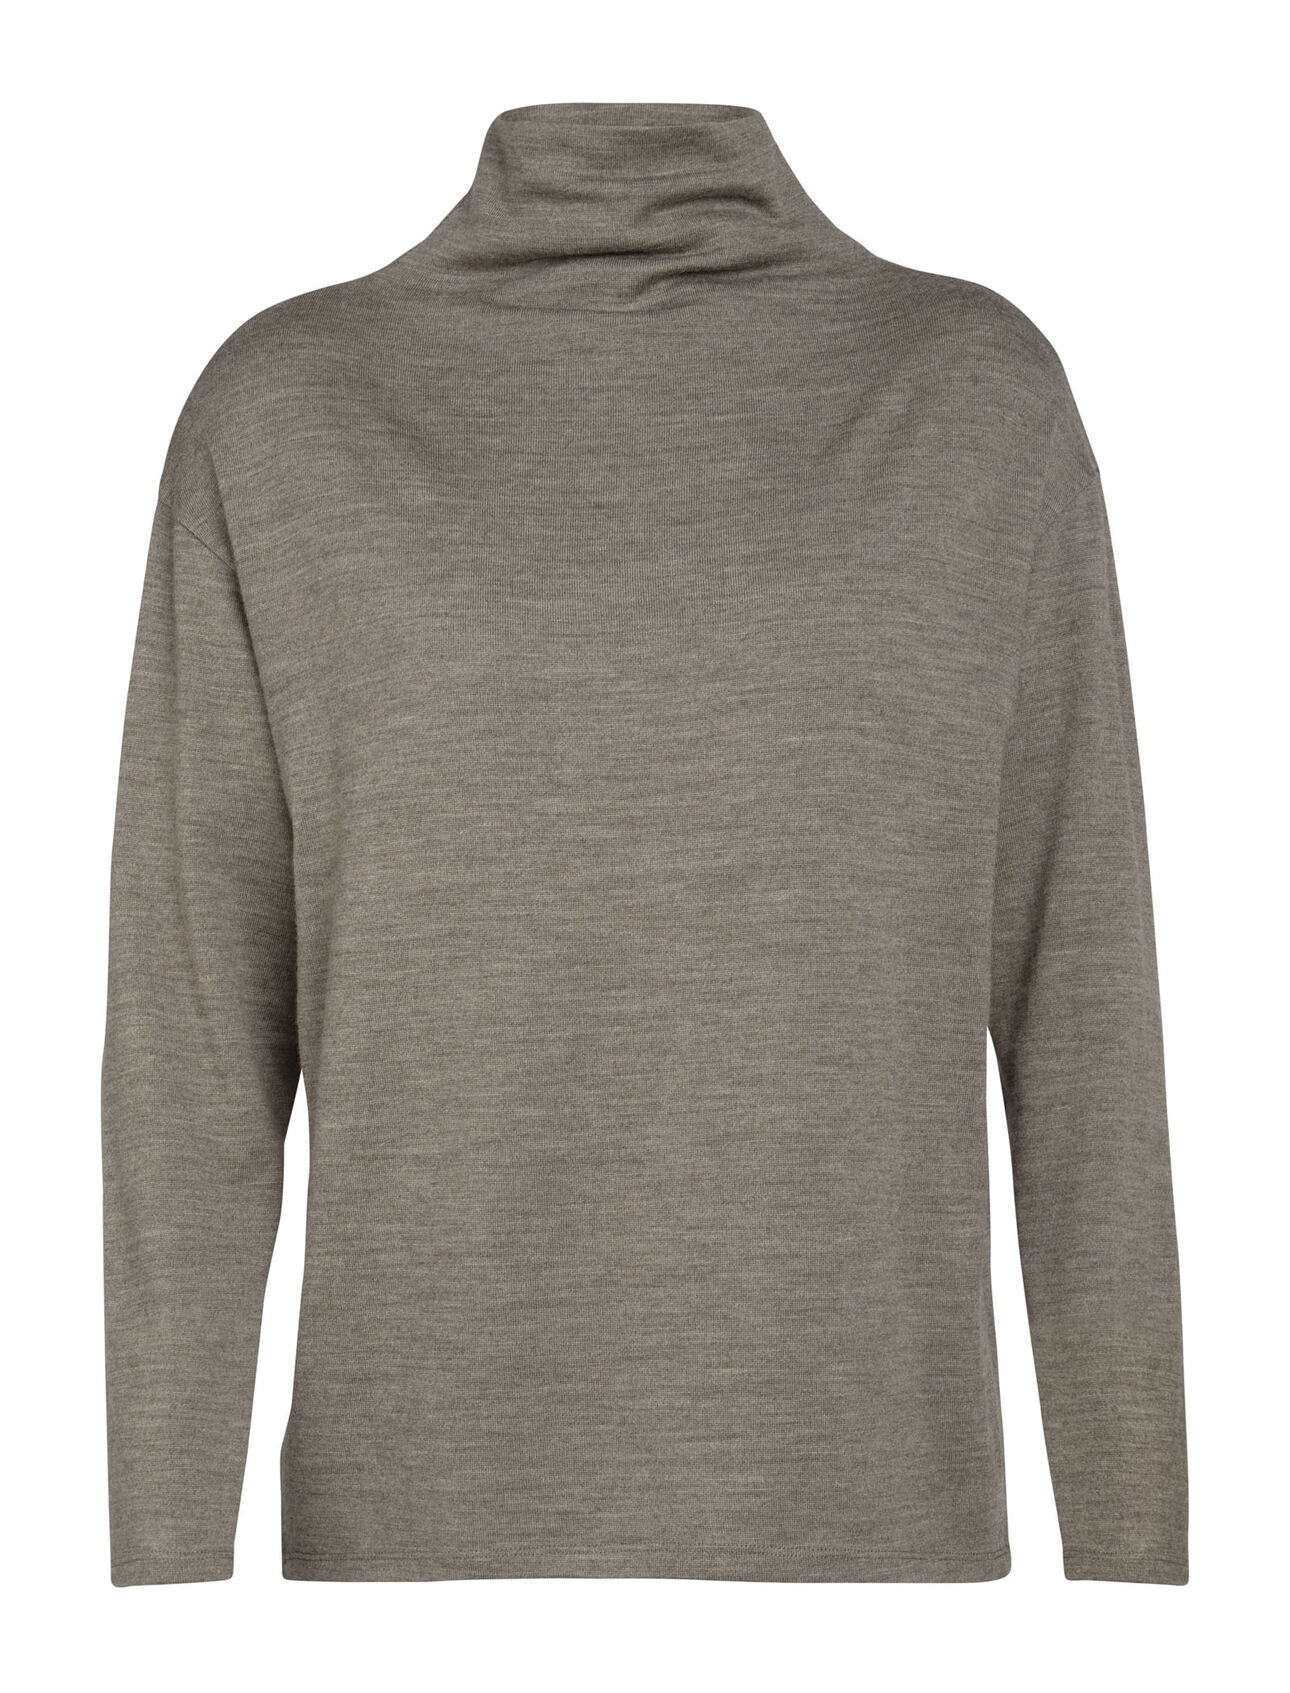 dla kobiet Merino Deice Long Sleeve Turtleneck Sweater  A modern top with a loose mock-neck design and our 100% merino jersey fabric, the Deice Long Sleeve Turtleneck is versatile, lightweight, and incredibly comfortable.